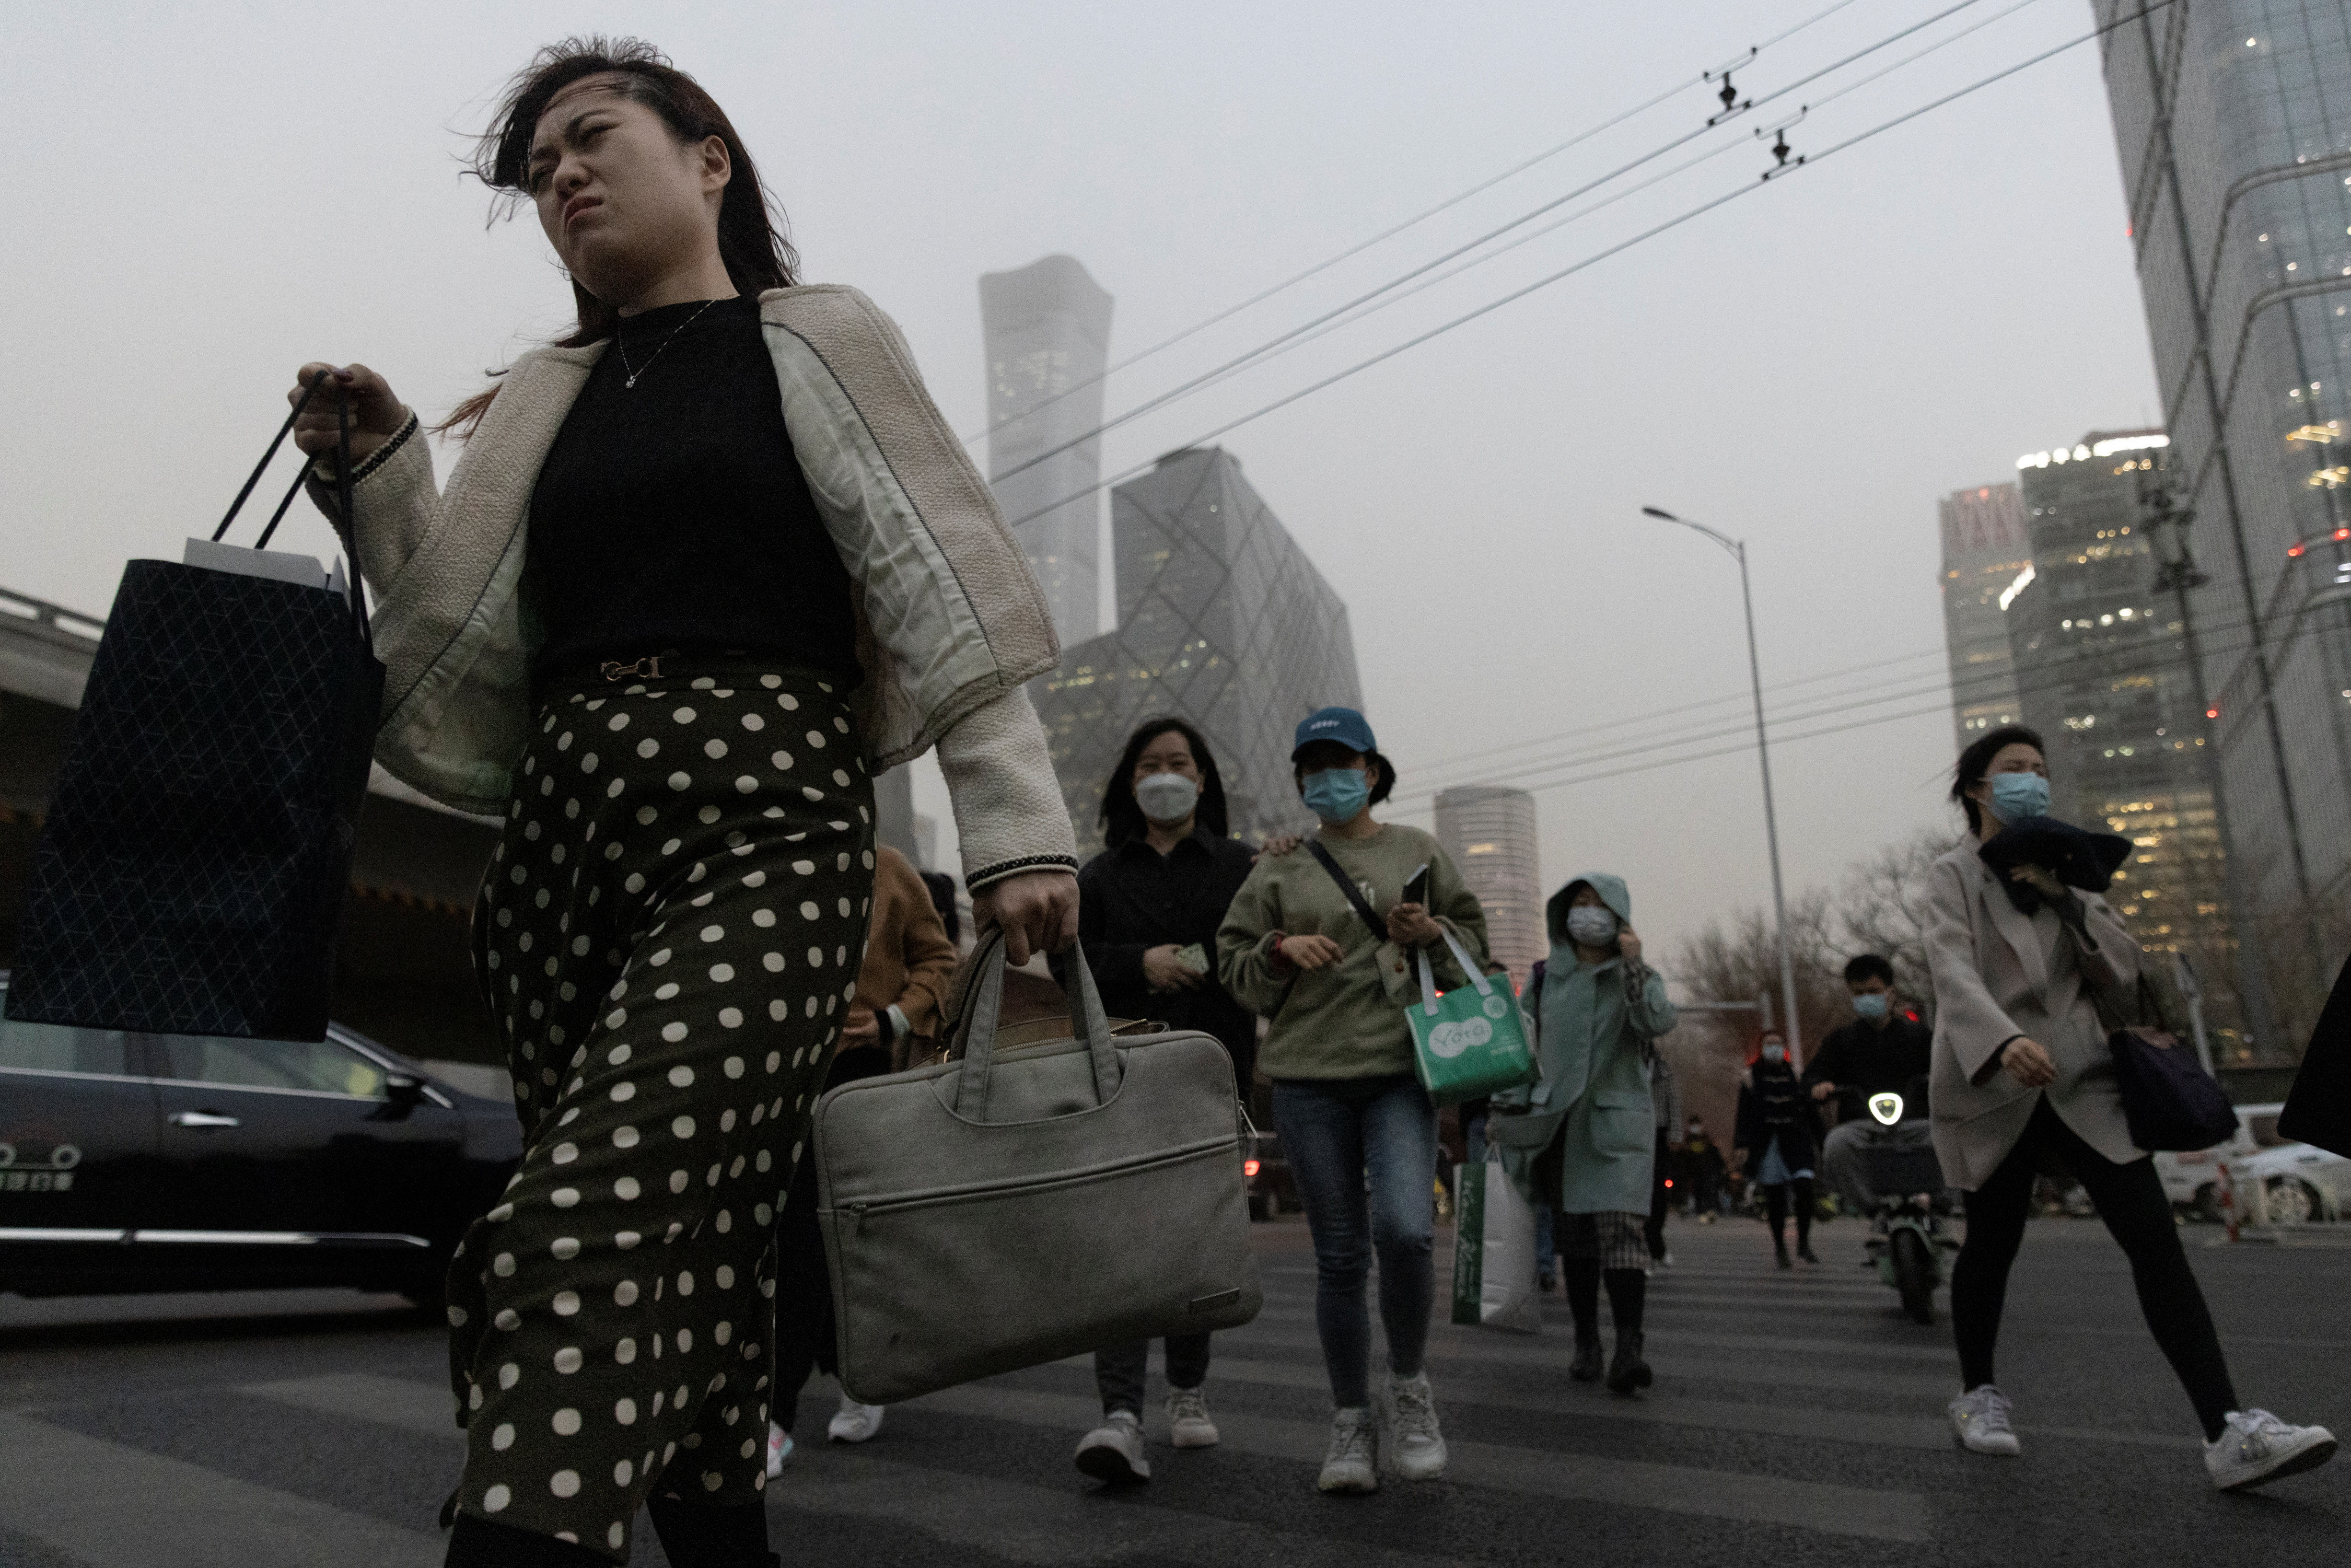 People cross a street in the Central Business District (CBD) on a polluted day in Beijing